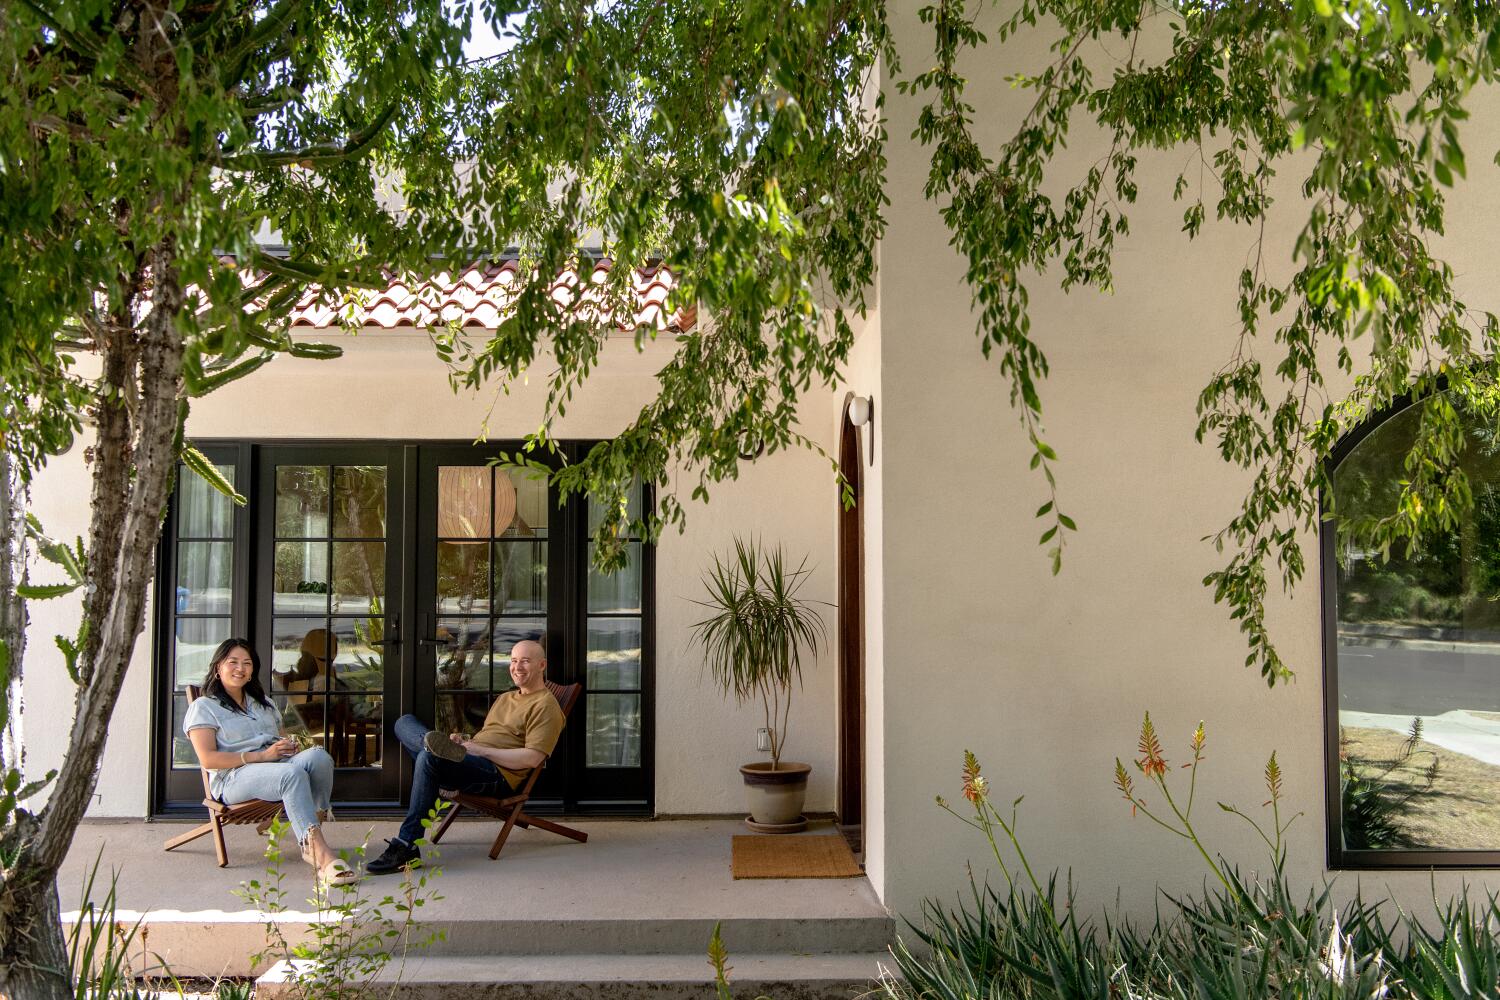 How a Spanish bungalow in L.A. went from sad to sexy (Hint: There's an ADU rental)